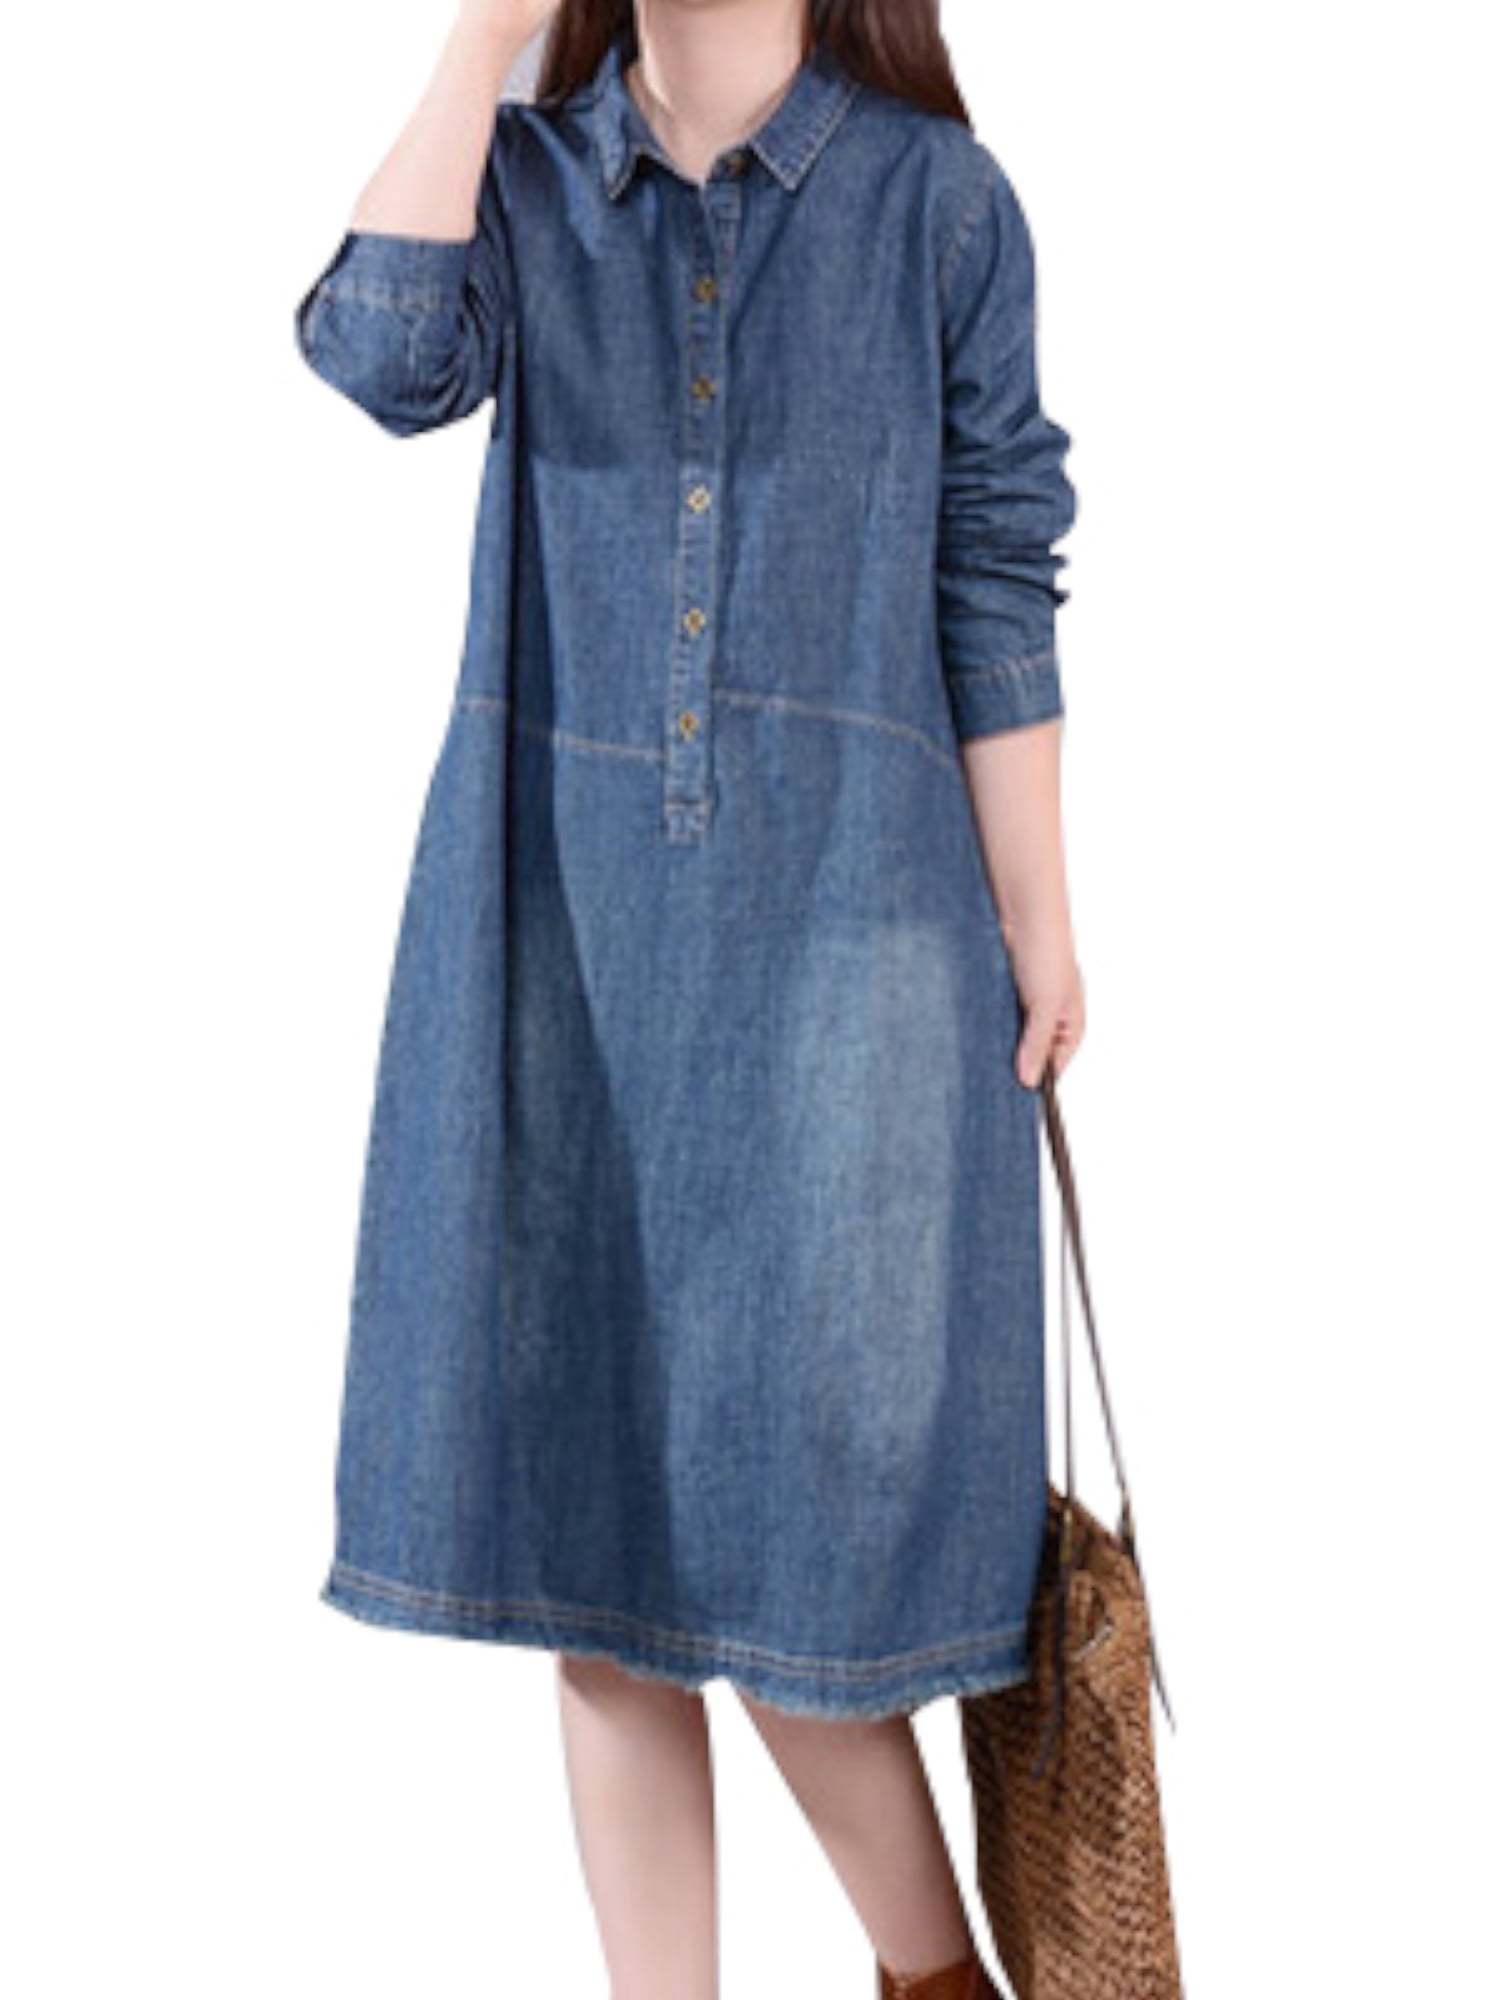 Buy Lil Lollipop Mild Distressed Denim Frock Blue 2 for Girls 56Years  Online in India Shop at FirstCrycom  14022912